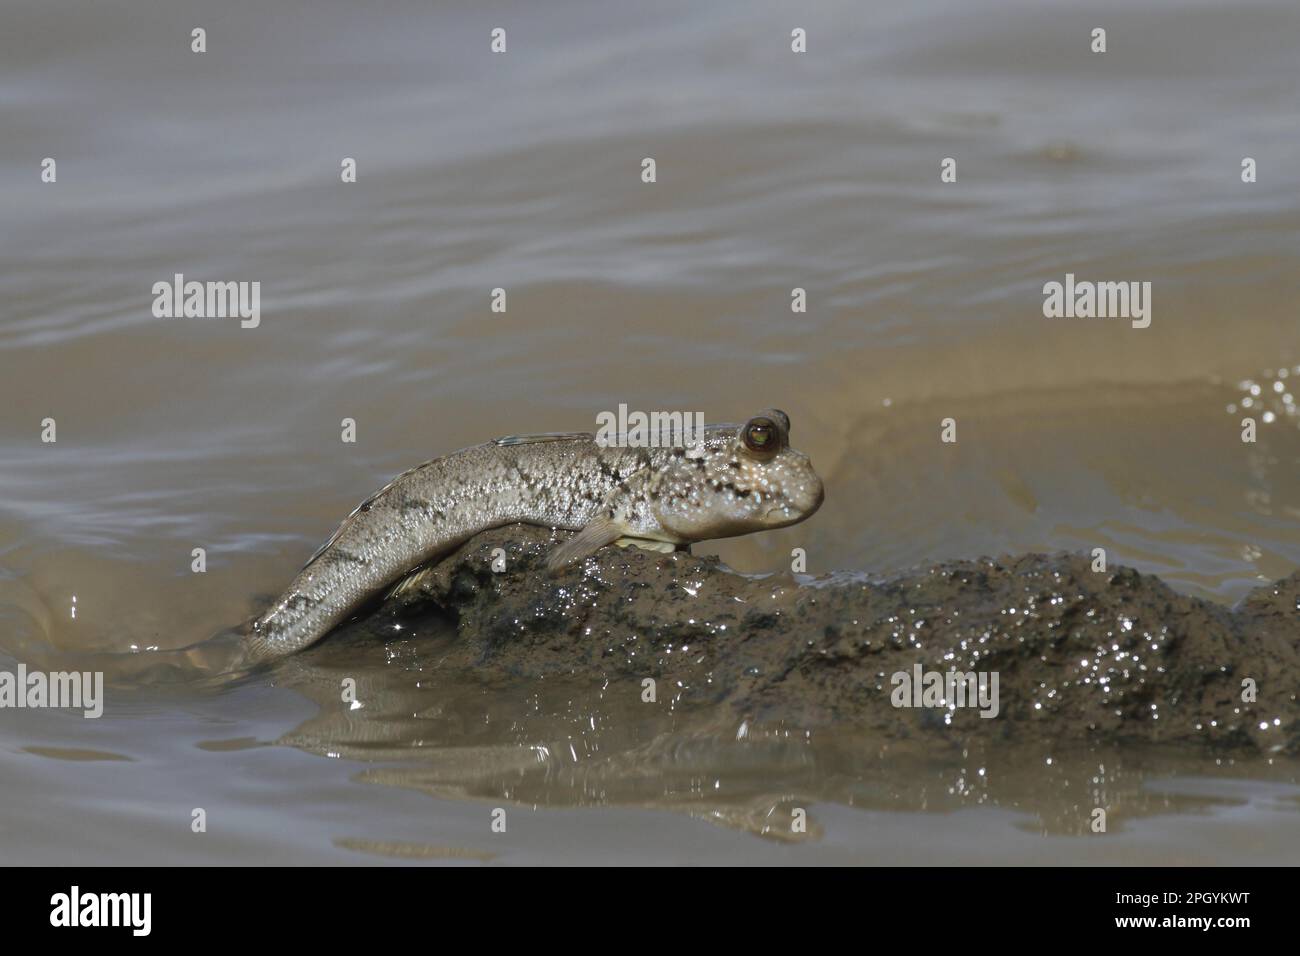 Mudskipper, Other animals, Fish, Animals, Gobies, Mudskipper (Periophthalmus sp.) adult, climbing out of water, Gambia Stock Photo